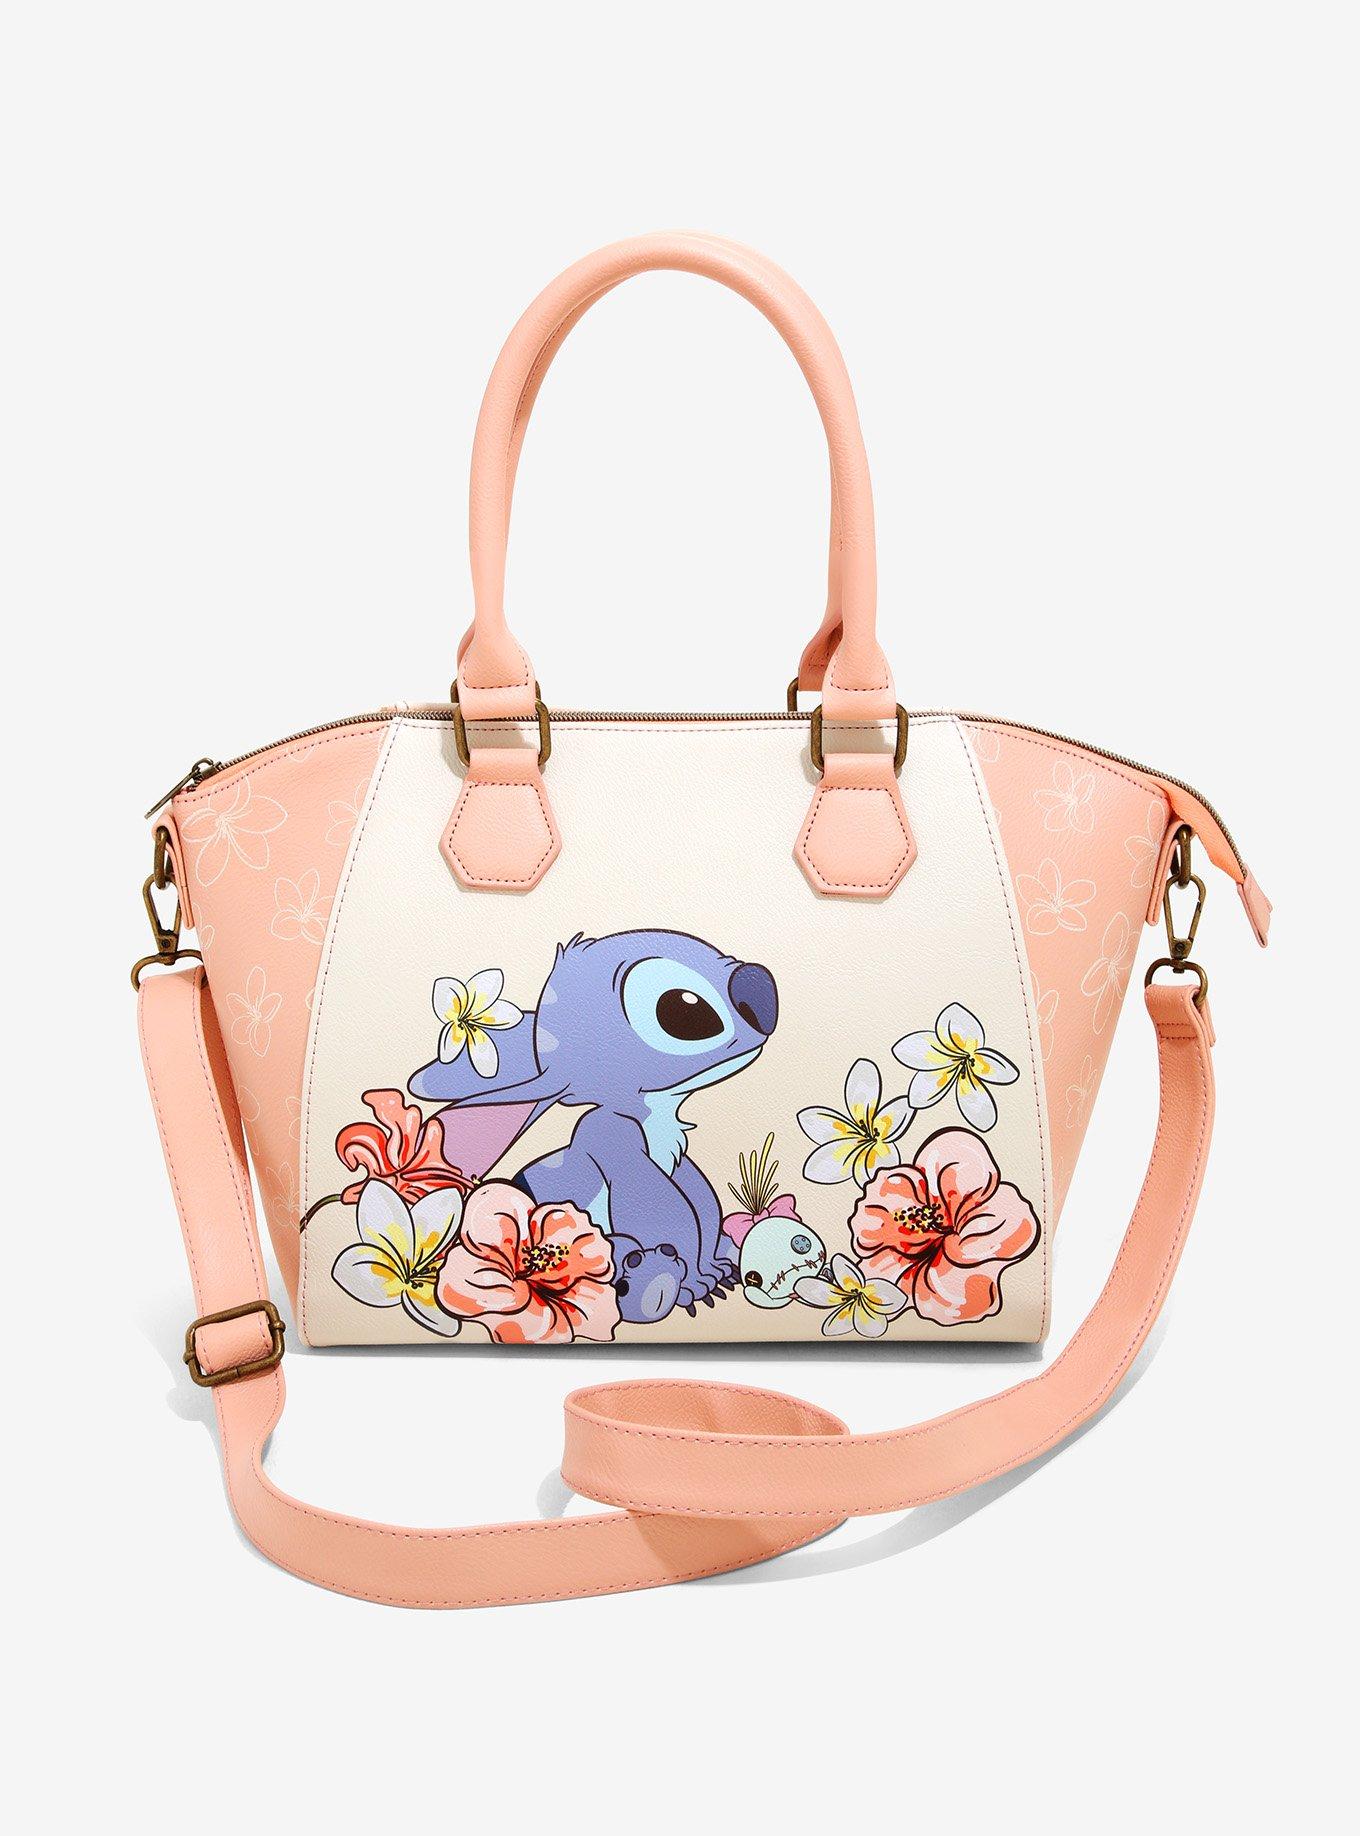 Disney Loungefly Lilo & Stitch Tropical Floral Wallet Brand New